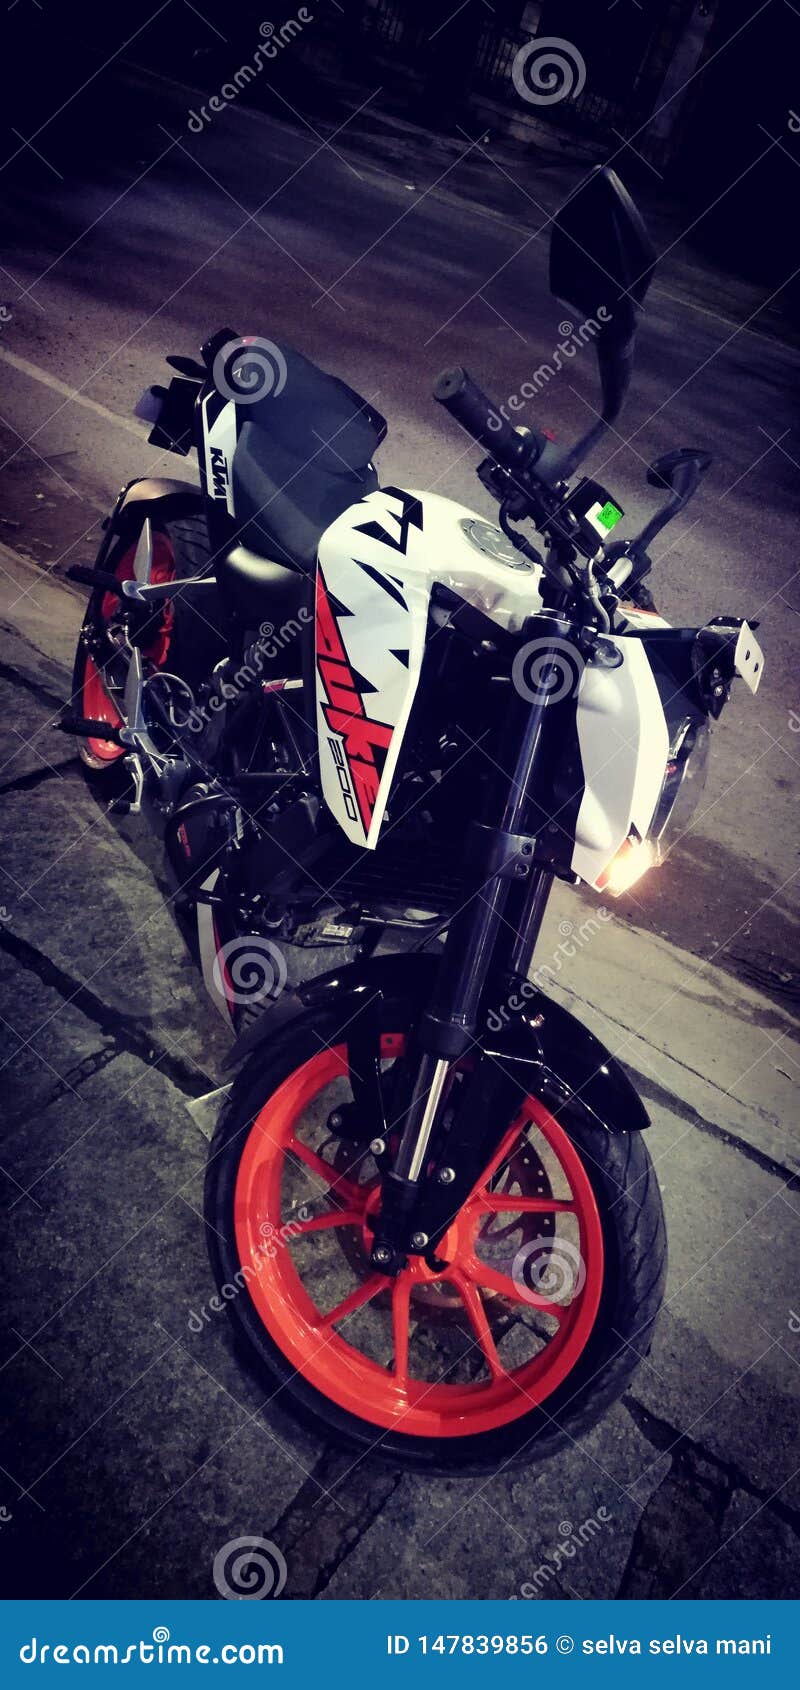 Ktm Duke My Bike Racer Awesome Moments Editorial Photo - Image of awesome,  moments: 147839856